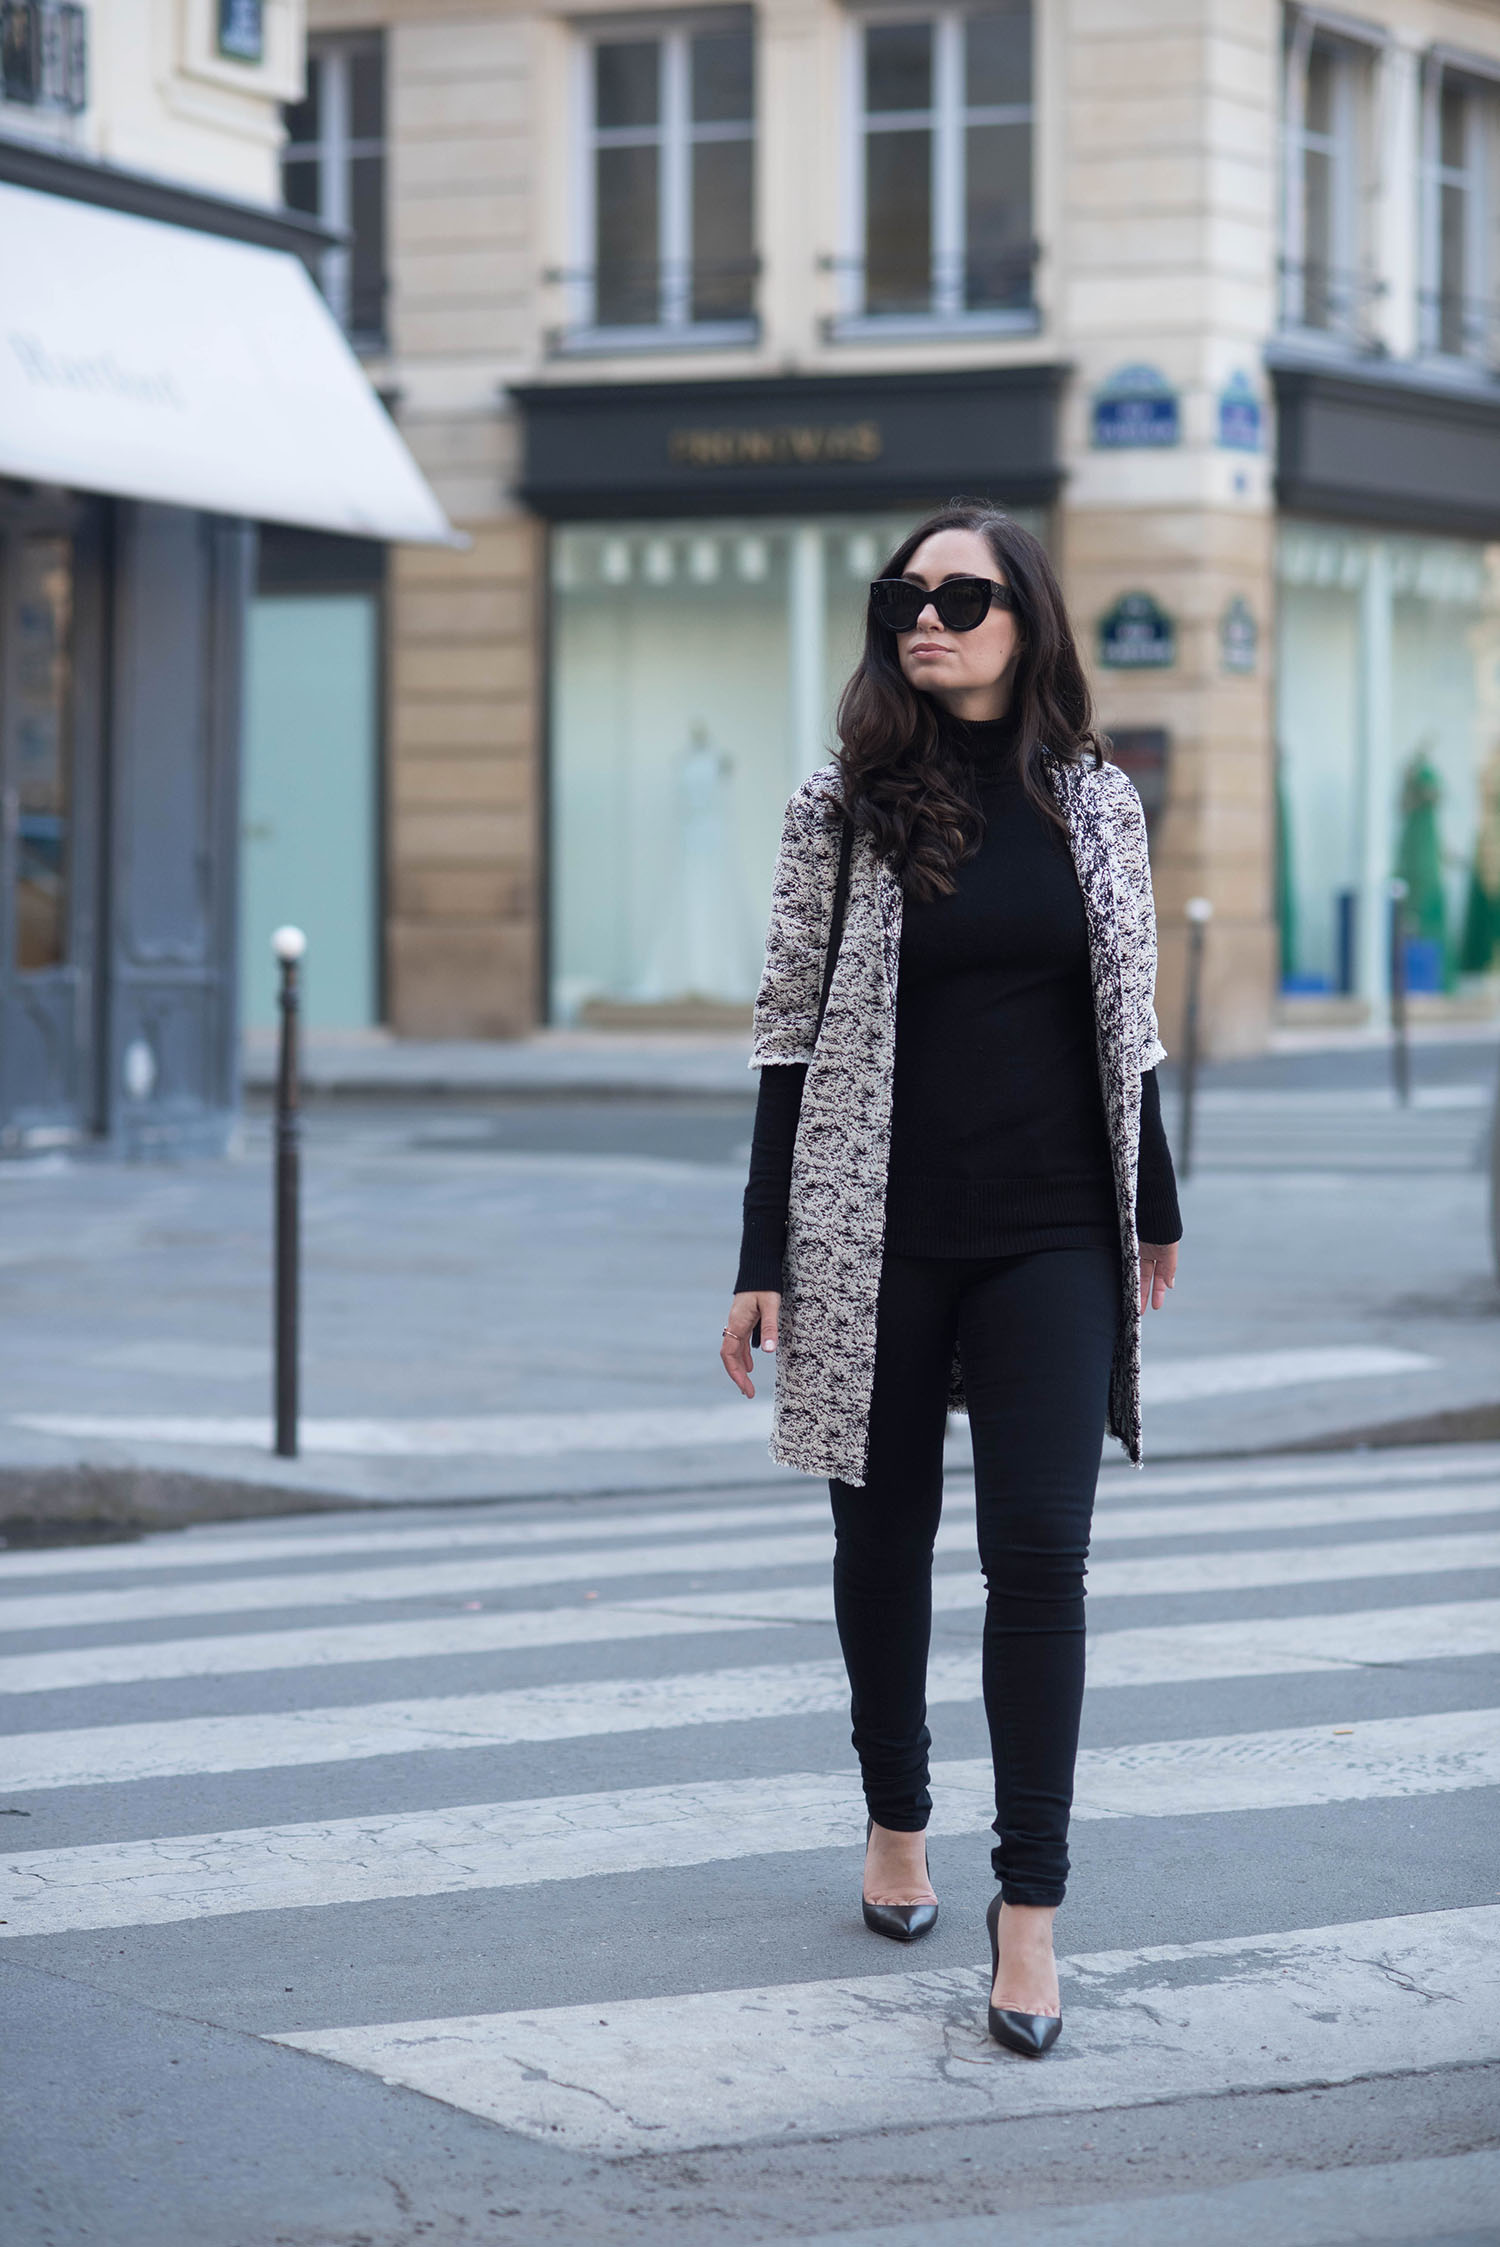 Fashion blogger Cee Fardoe of Coco & Vera walks at Place des Victoires in Paris wearing a Floriane Fosso coat and Christian Louboutin Pigalle pumps